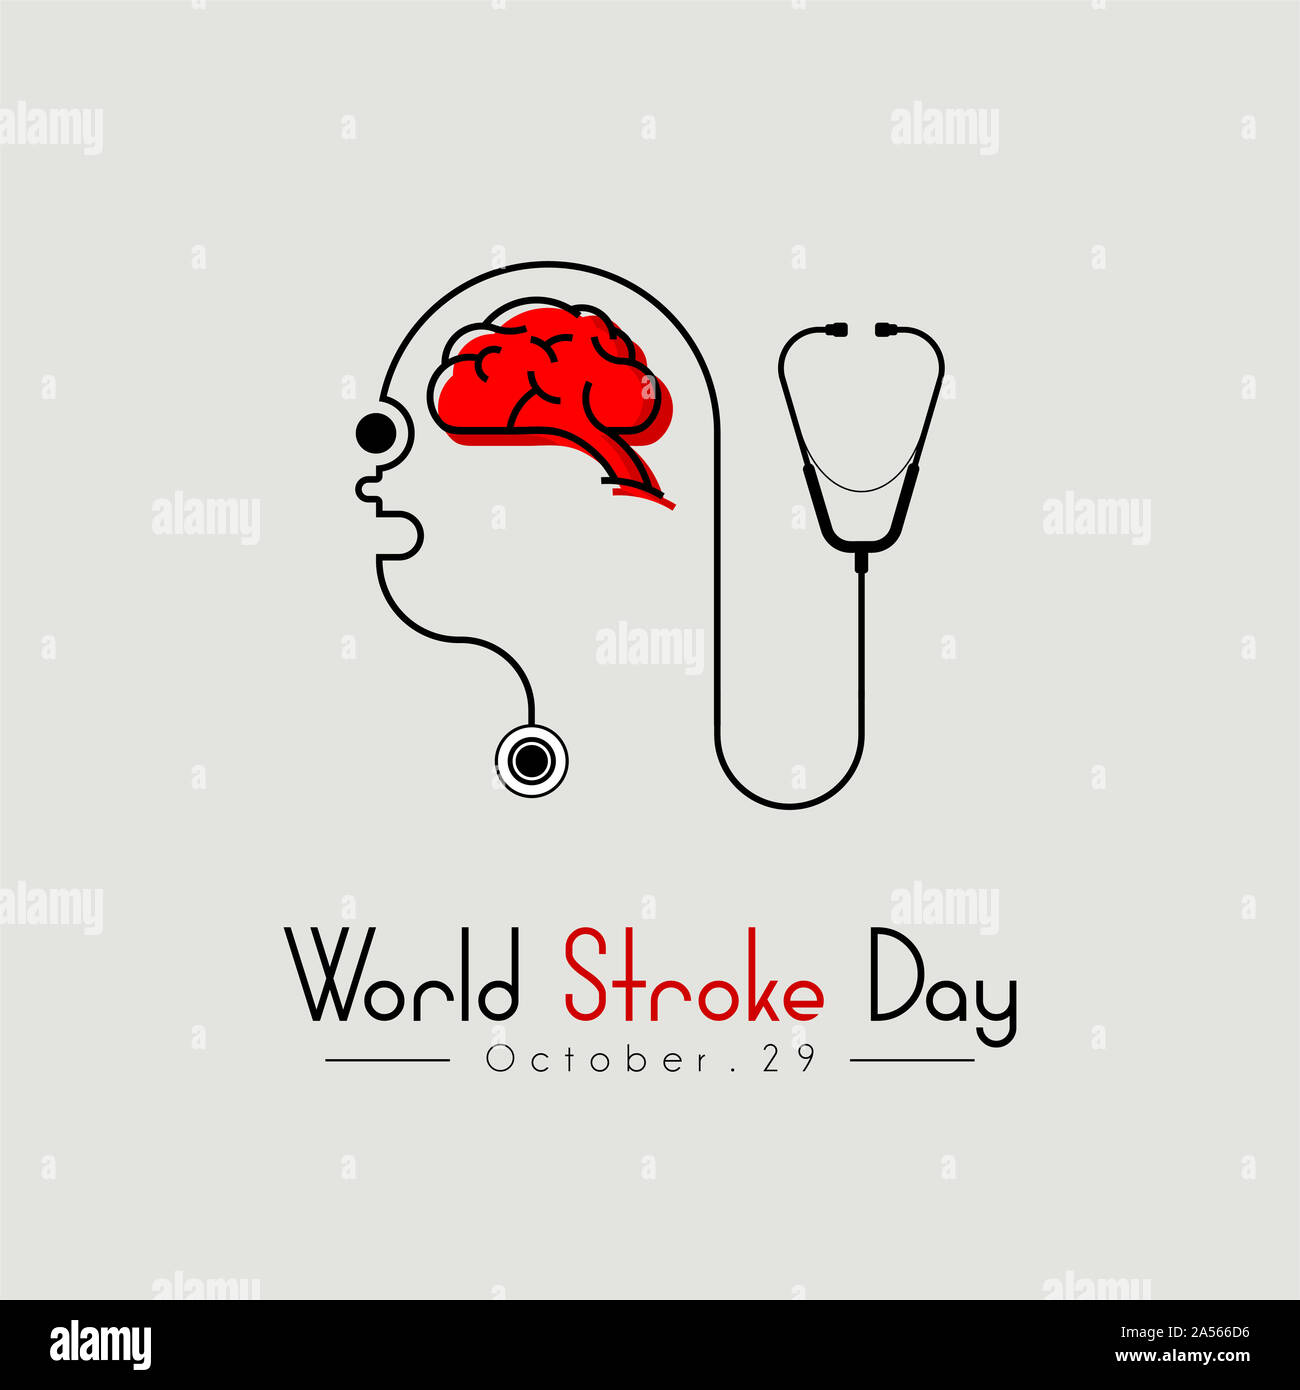 World Stroke Day With Stethoscope Human Head and Brain vector design Stock Photo